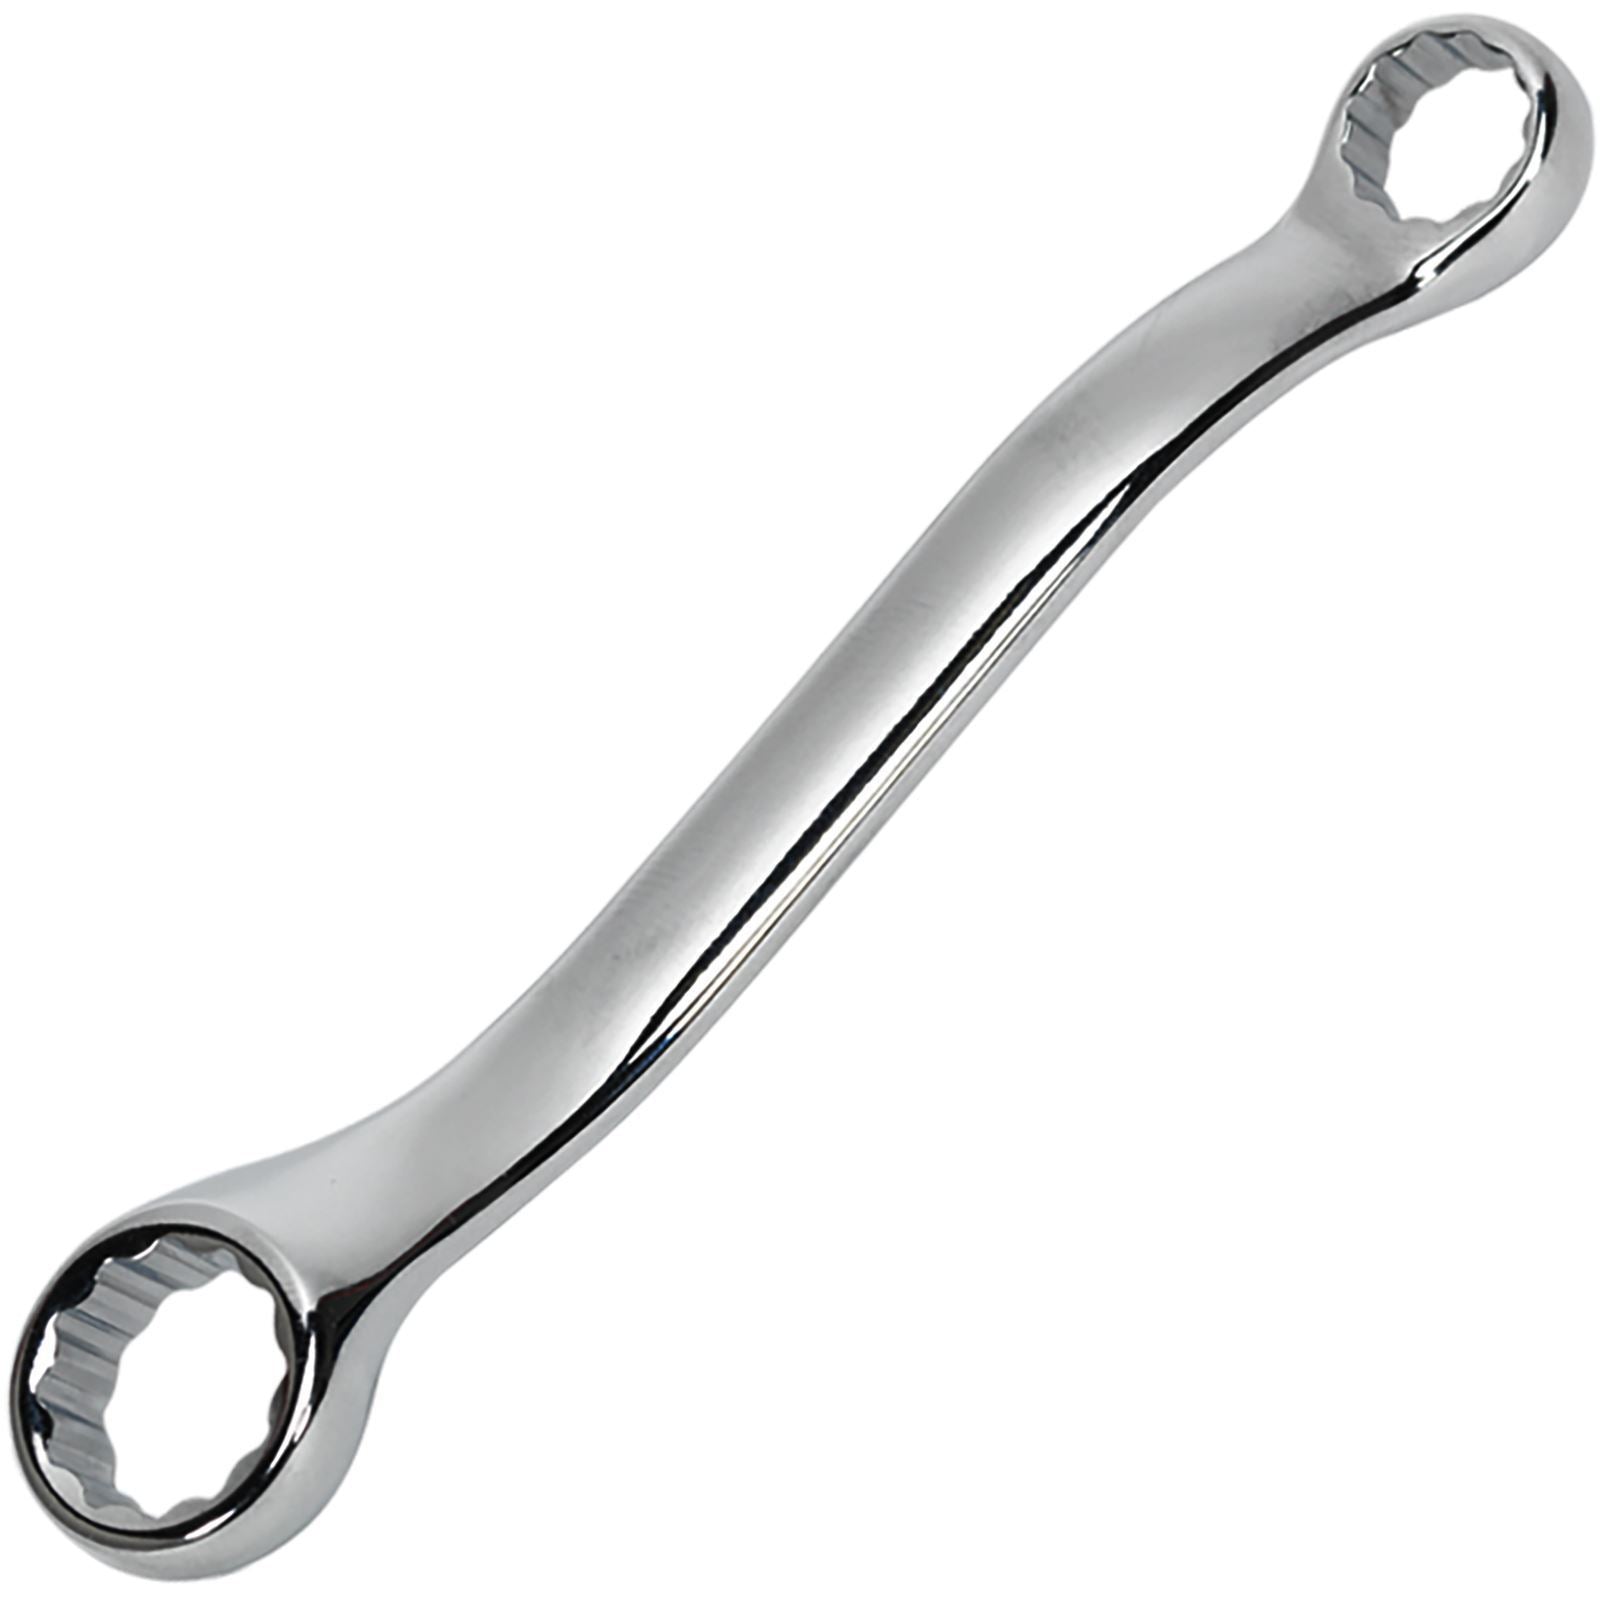 Sealey Offset Stubby Ring Rowing Spanner 10mm x 13mm Double End Rigger Jigger